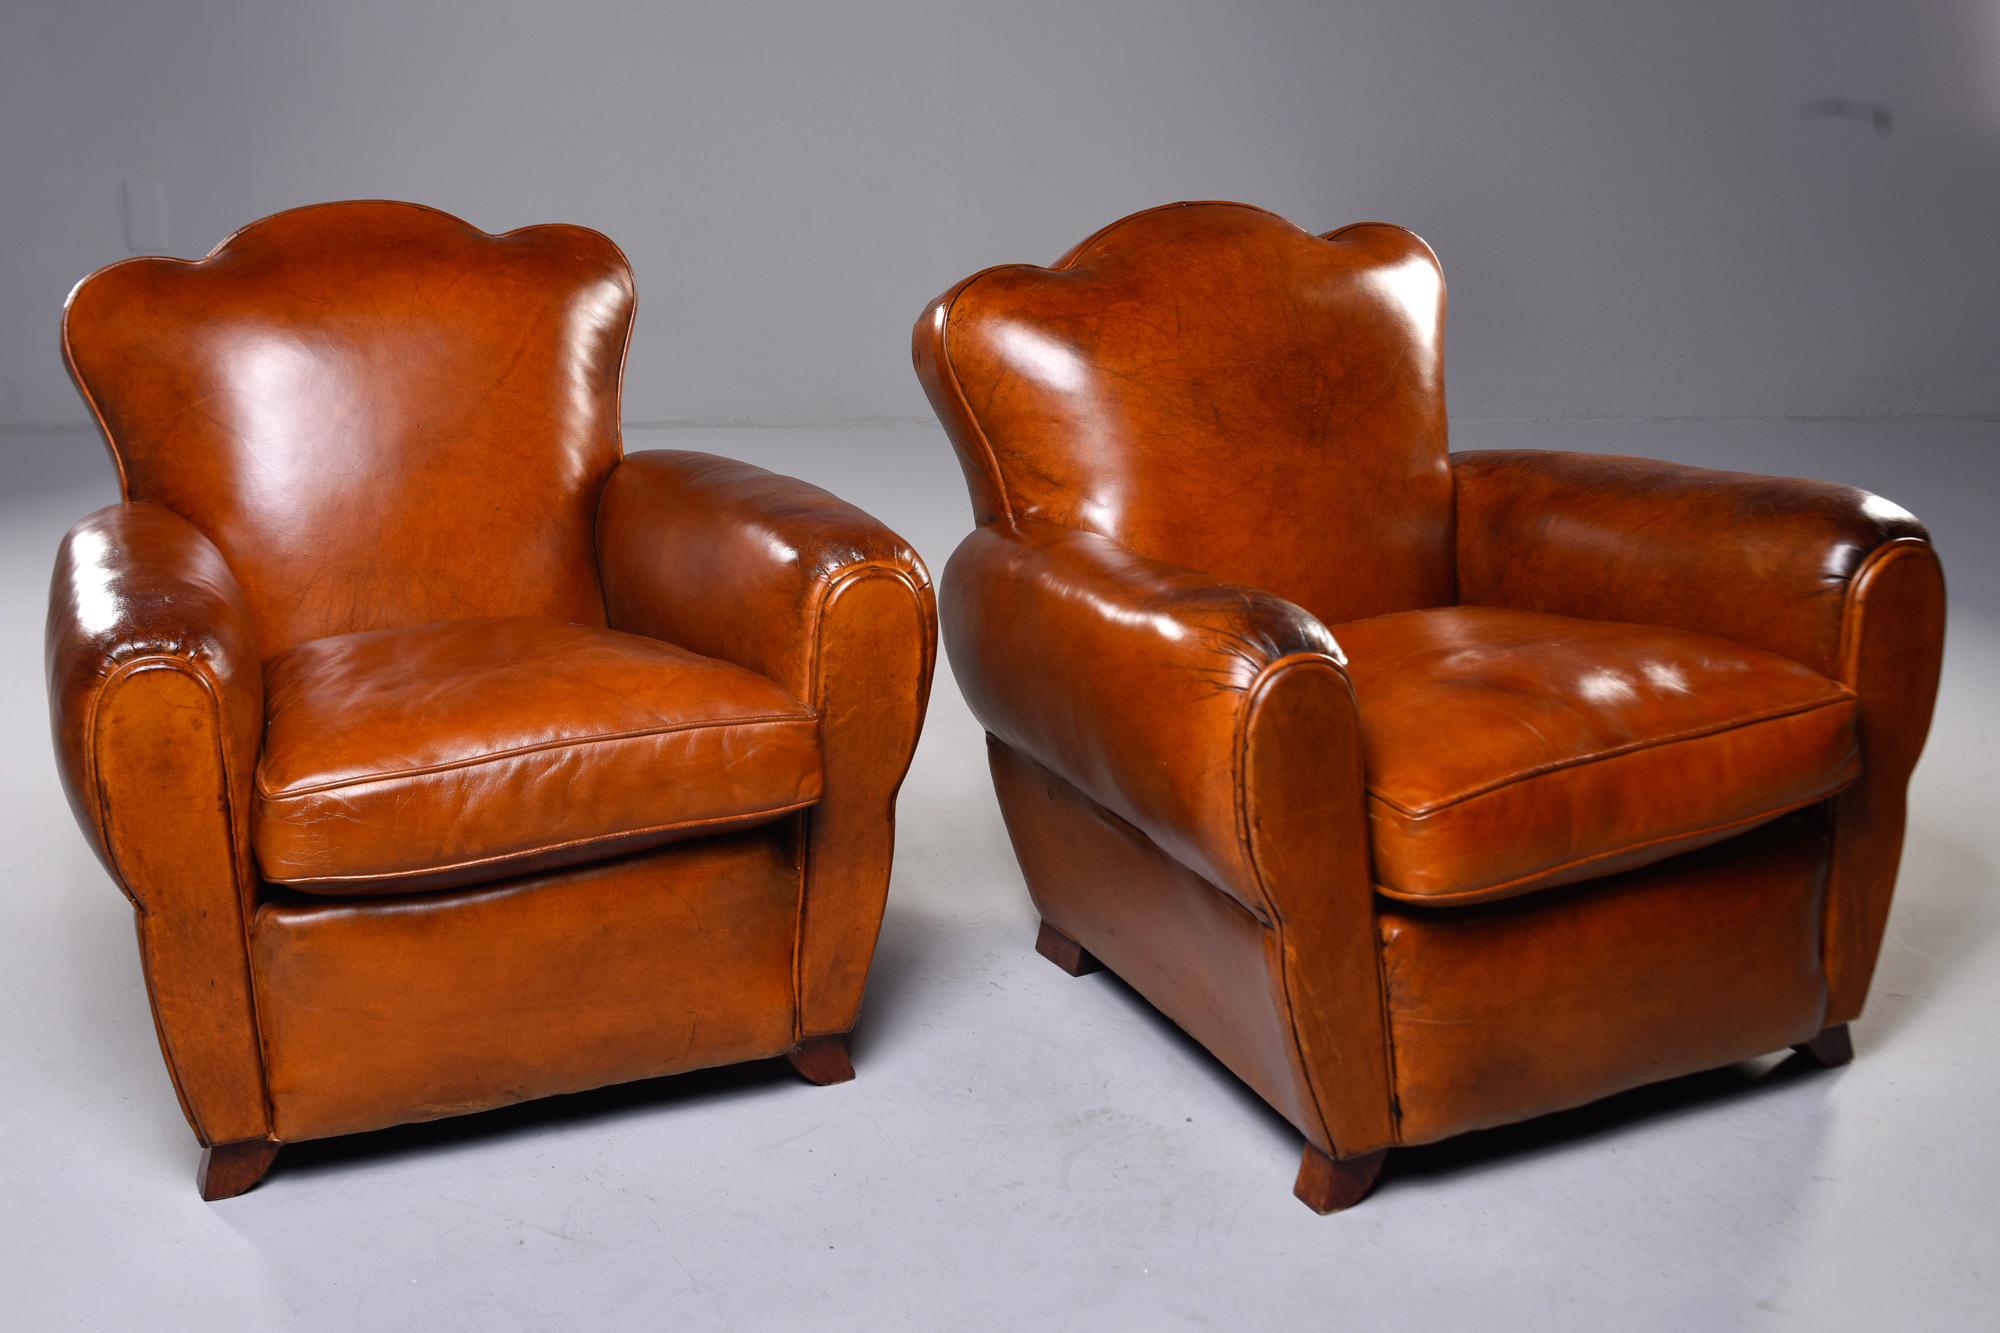 Pair of circa 1930s French Art Deco club chairs in saddle brown leather with loose seat cushions, rounded arms, angled wood feet and curved, camel shaped seat backs. Sold and priced as a pair. Unknown maker.

Measures: Arm height: 23”
Seat